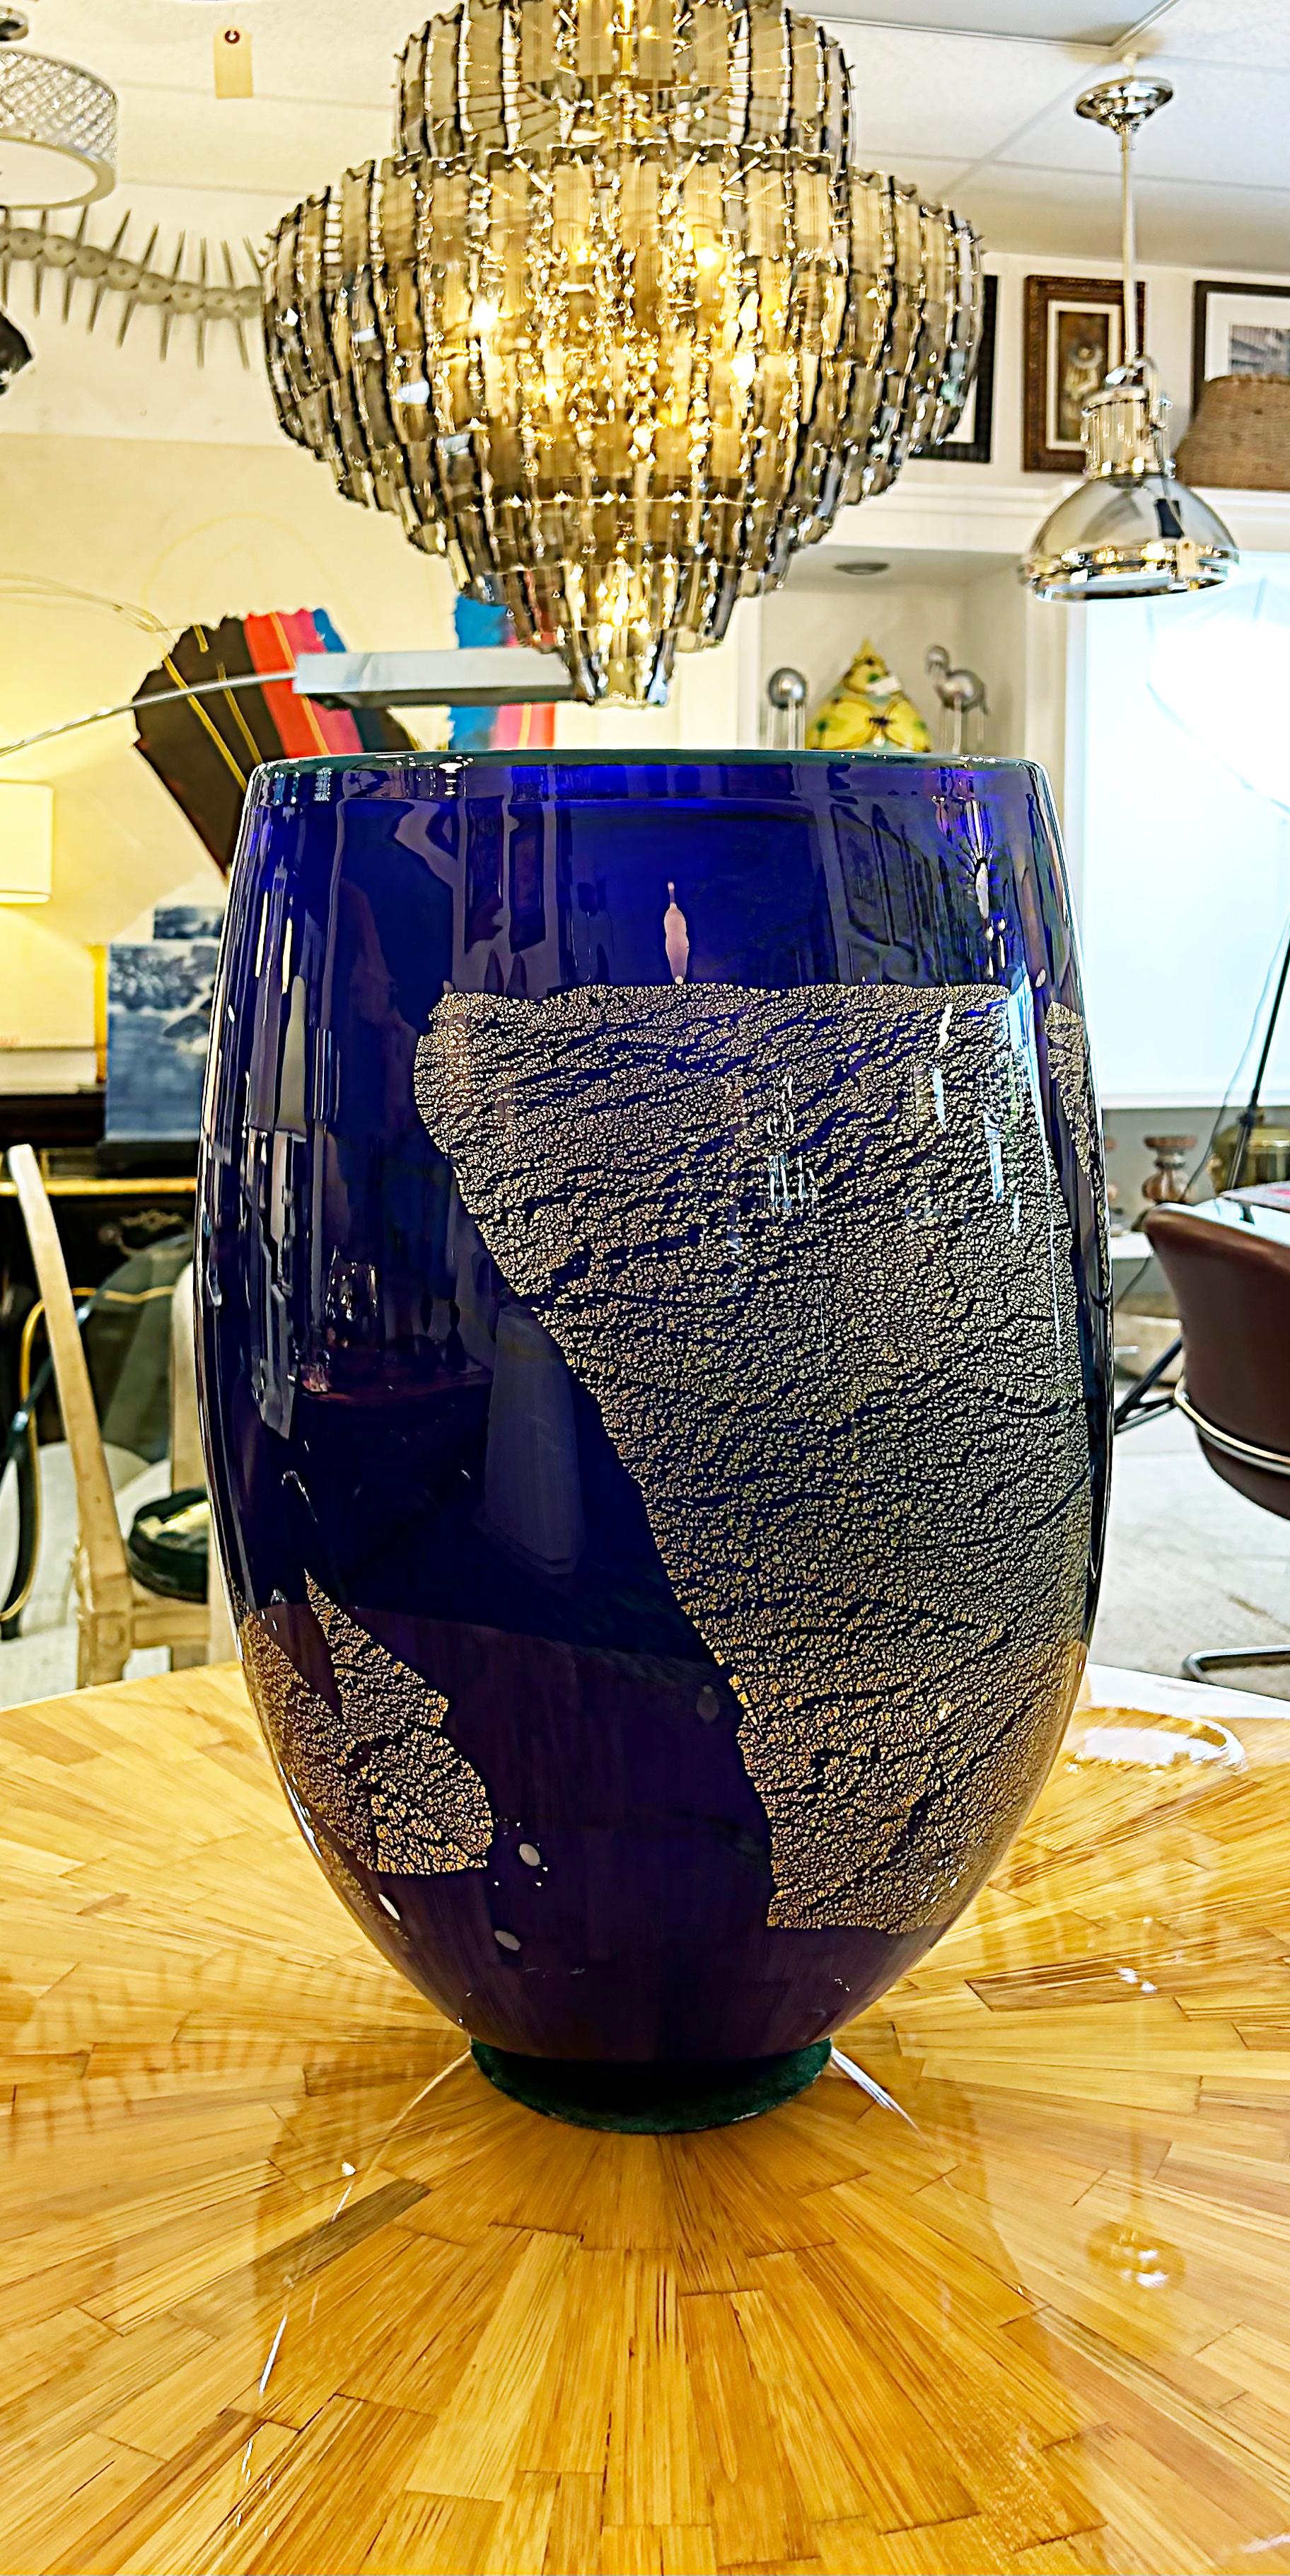 Ioan Nemtoi Modern Monumental Studio Art Glass Vase, Bucharest, Romania

Offered for sale is a large and quite substantial studio-blown art glass vase by Ioan Nemoti of Bucharest, Romania. The blue vase is dramatic with large gold-infused accents